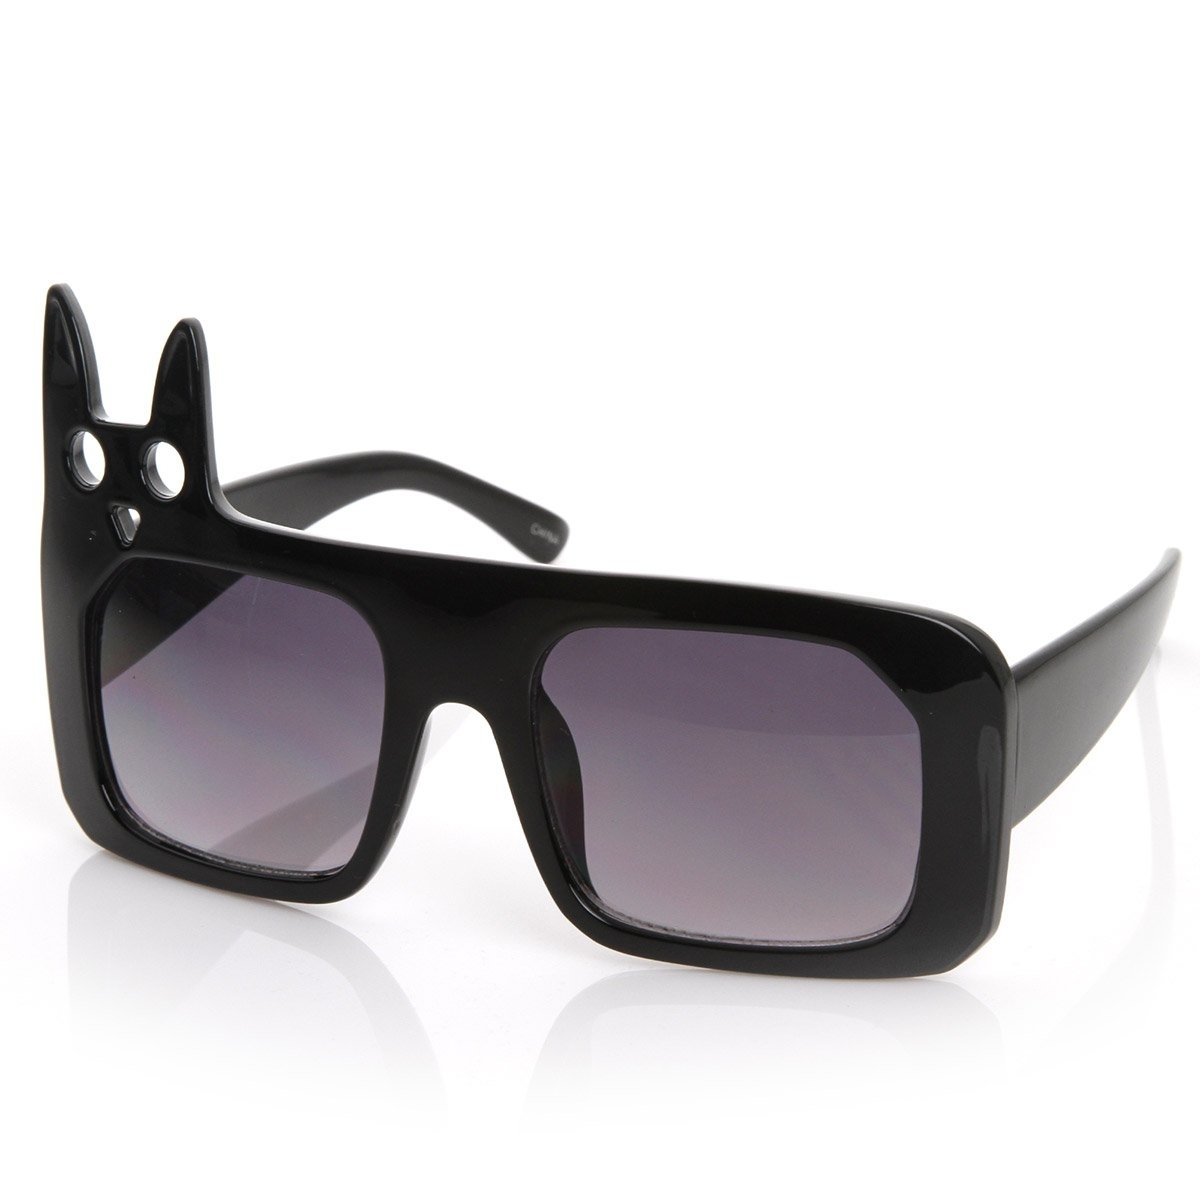 Luxe Inspired Fashion Kitty Cat Head Large Square Oversized Sunglasses - Purple